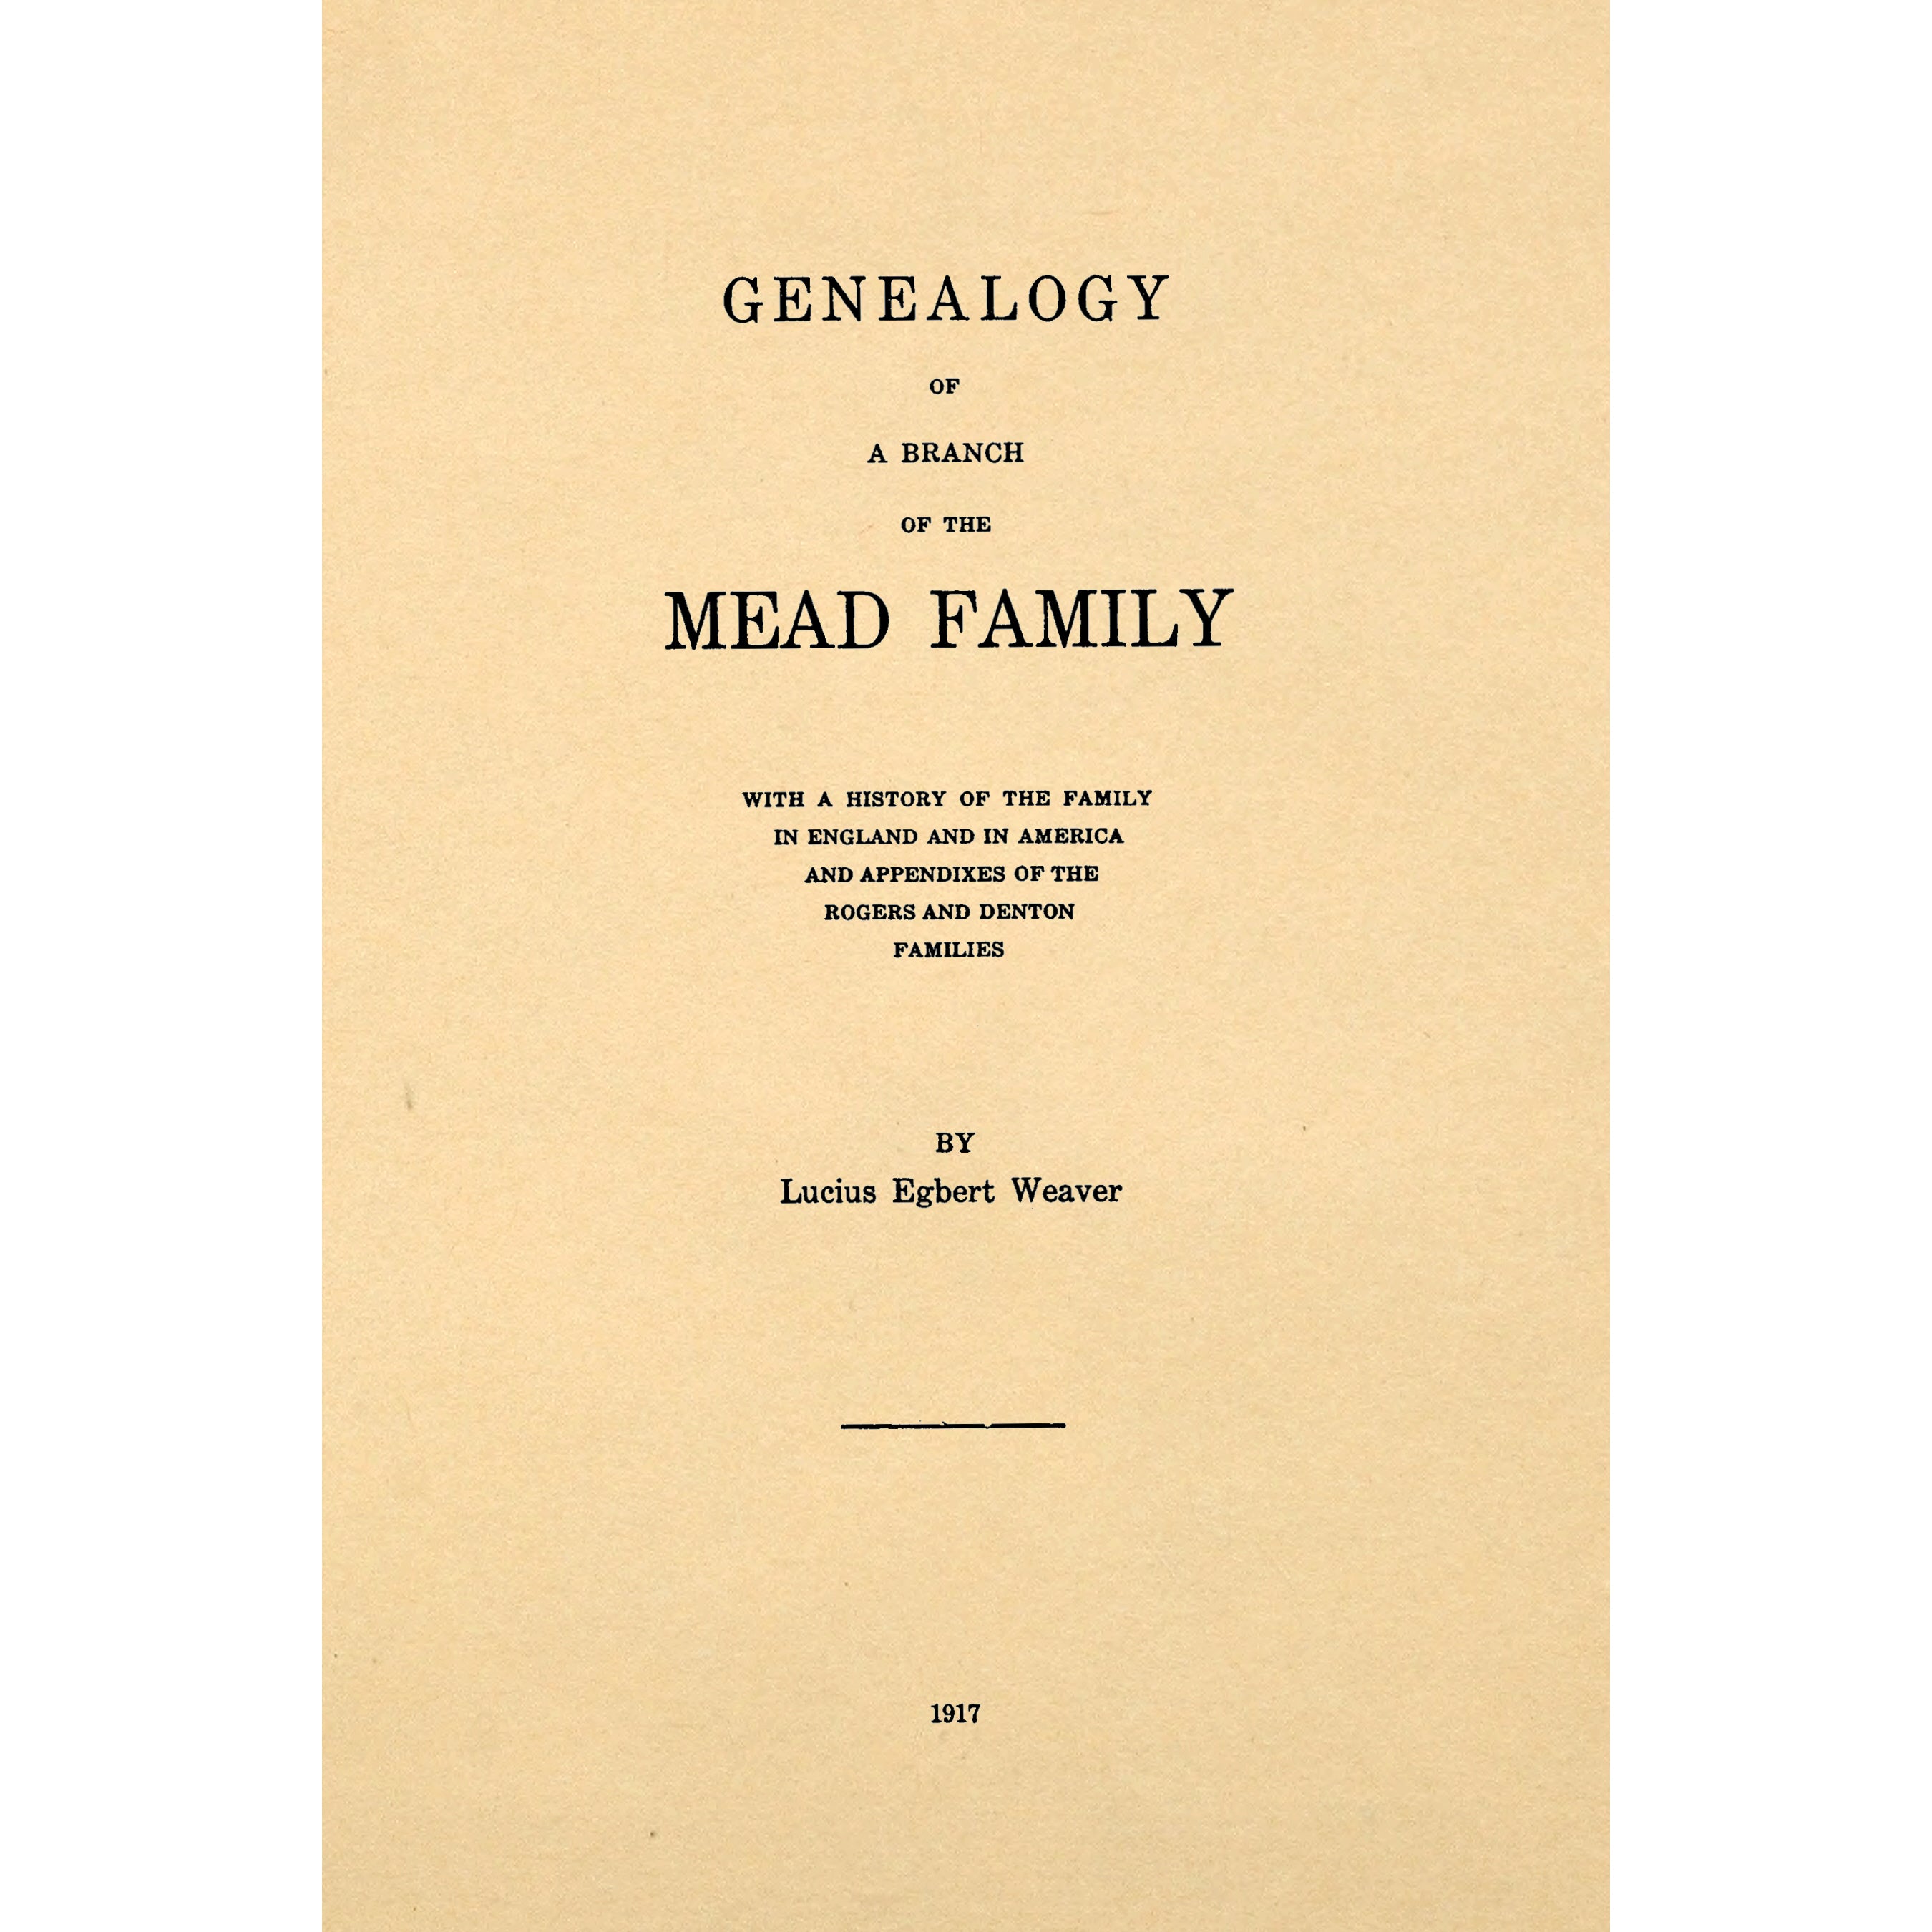 Genealogy of a branch of the Mead family : with a history of the family in England and in America and appendixes of Rogers and Denton families